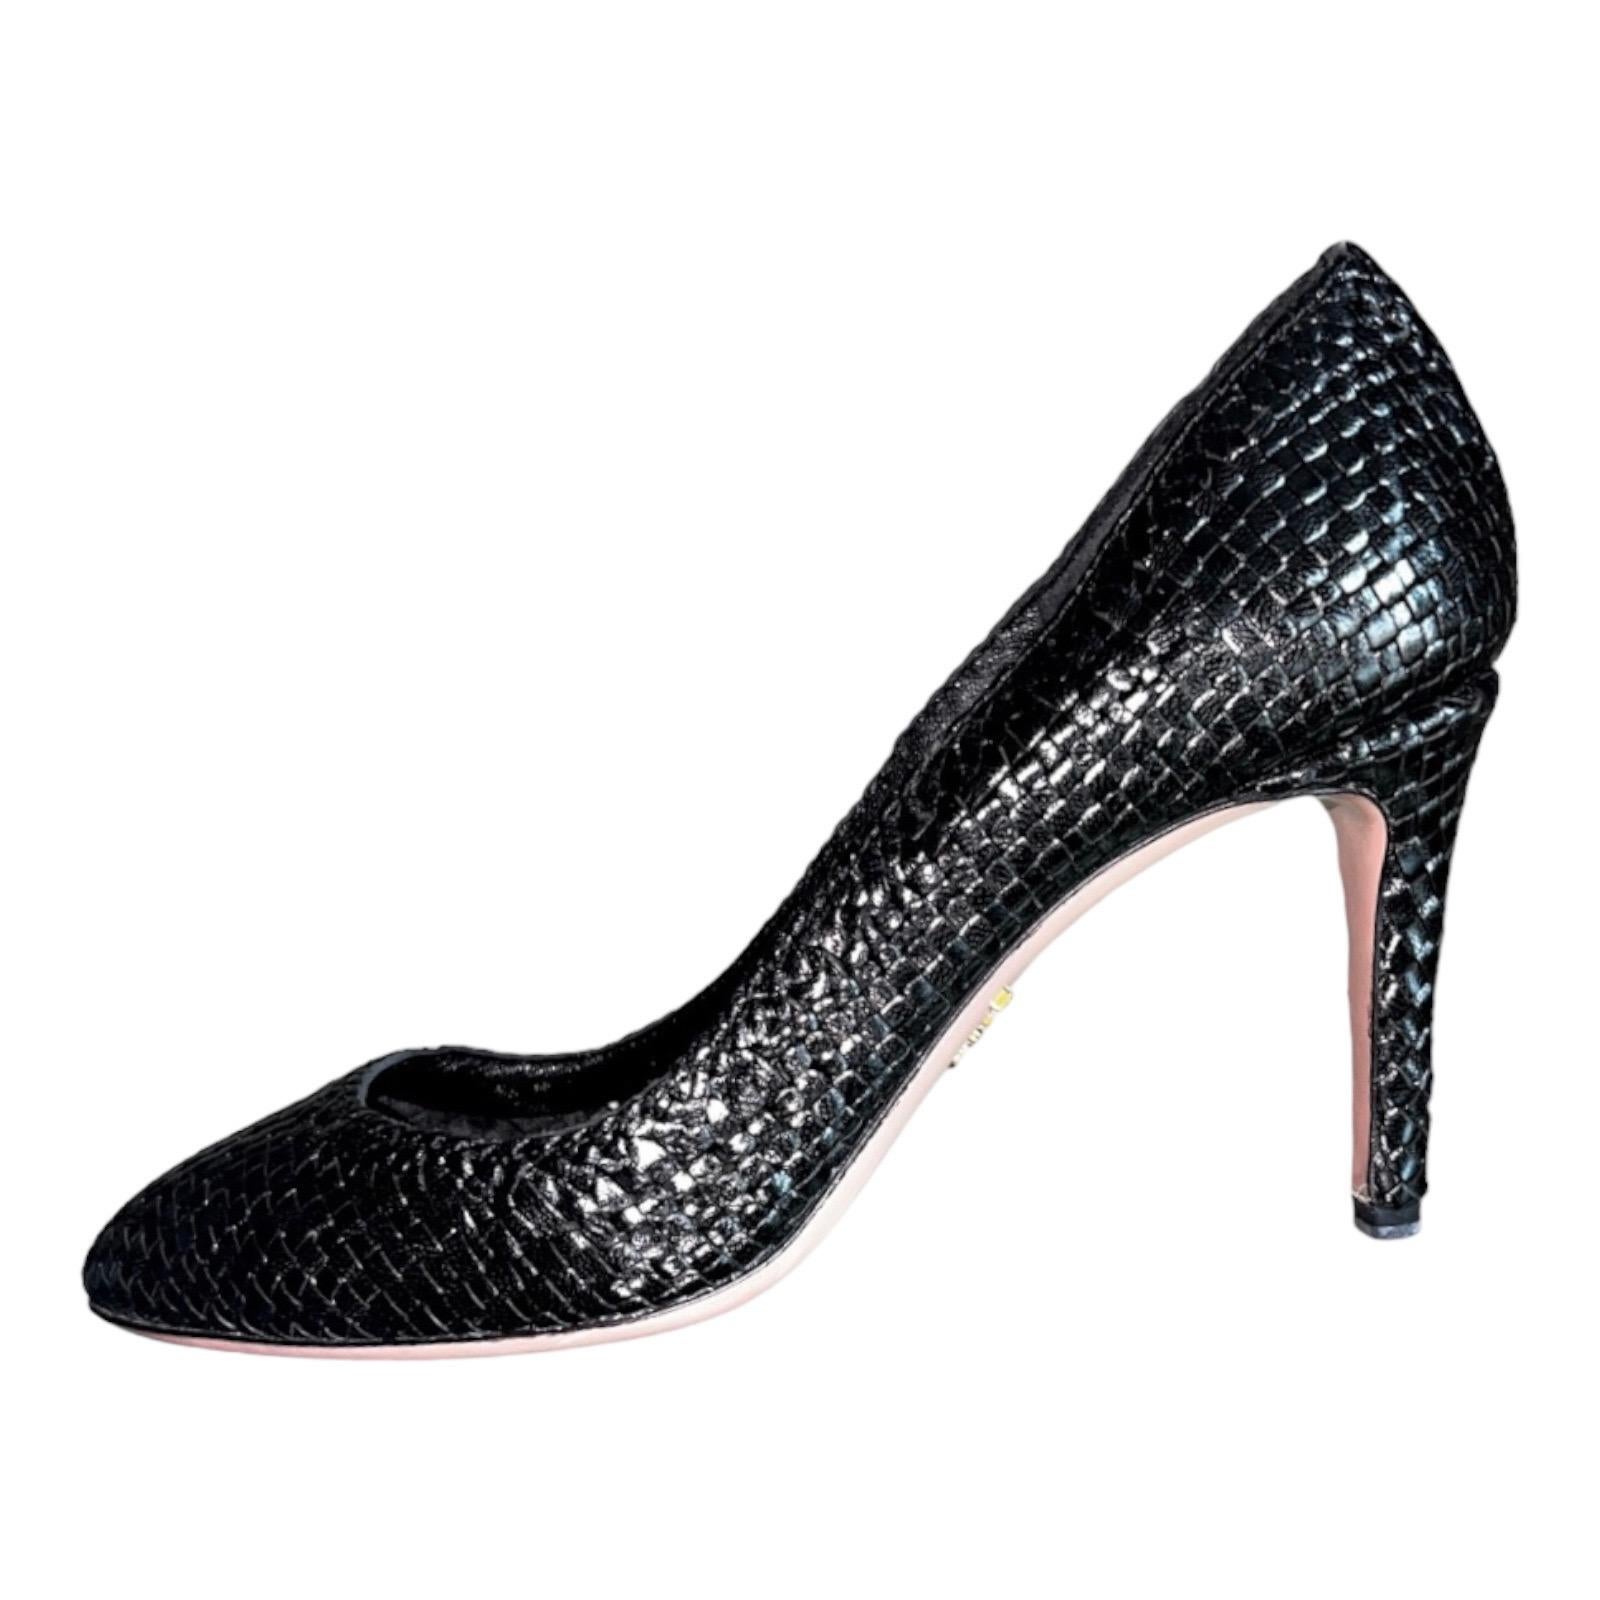 A PRADA signature piece and timeless classic that will last you for years
Beautiful woven design - handmade
Black leather
Full leather lining
Outer sole in real leather
From PRADA's luxurious limited INDIA collection - all hand-woven!
Pure luxury! A